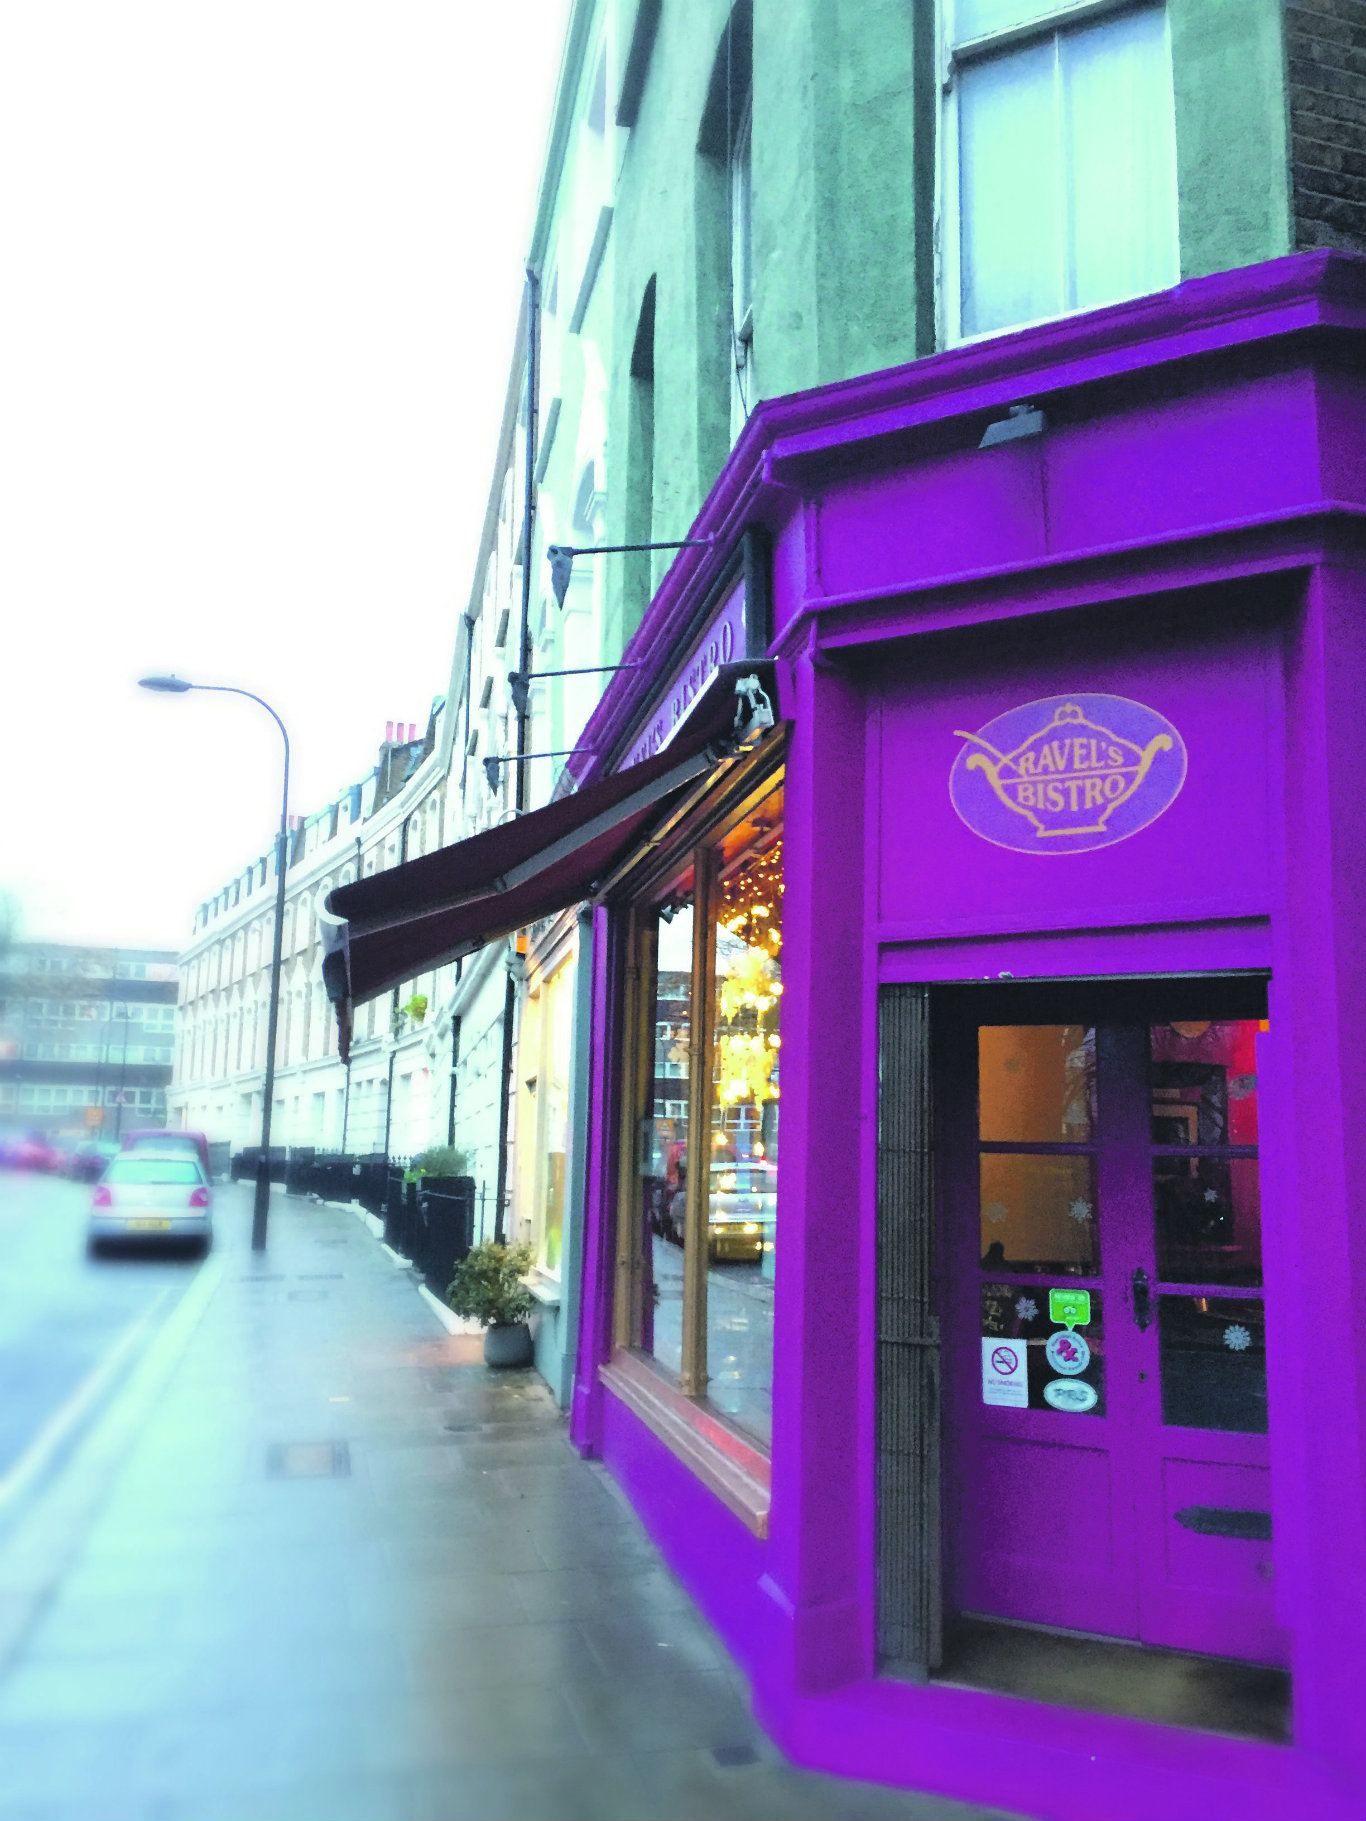 Ravel's Bistro has been on Fleet Road since the 1990s. Photo: SE